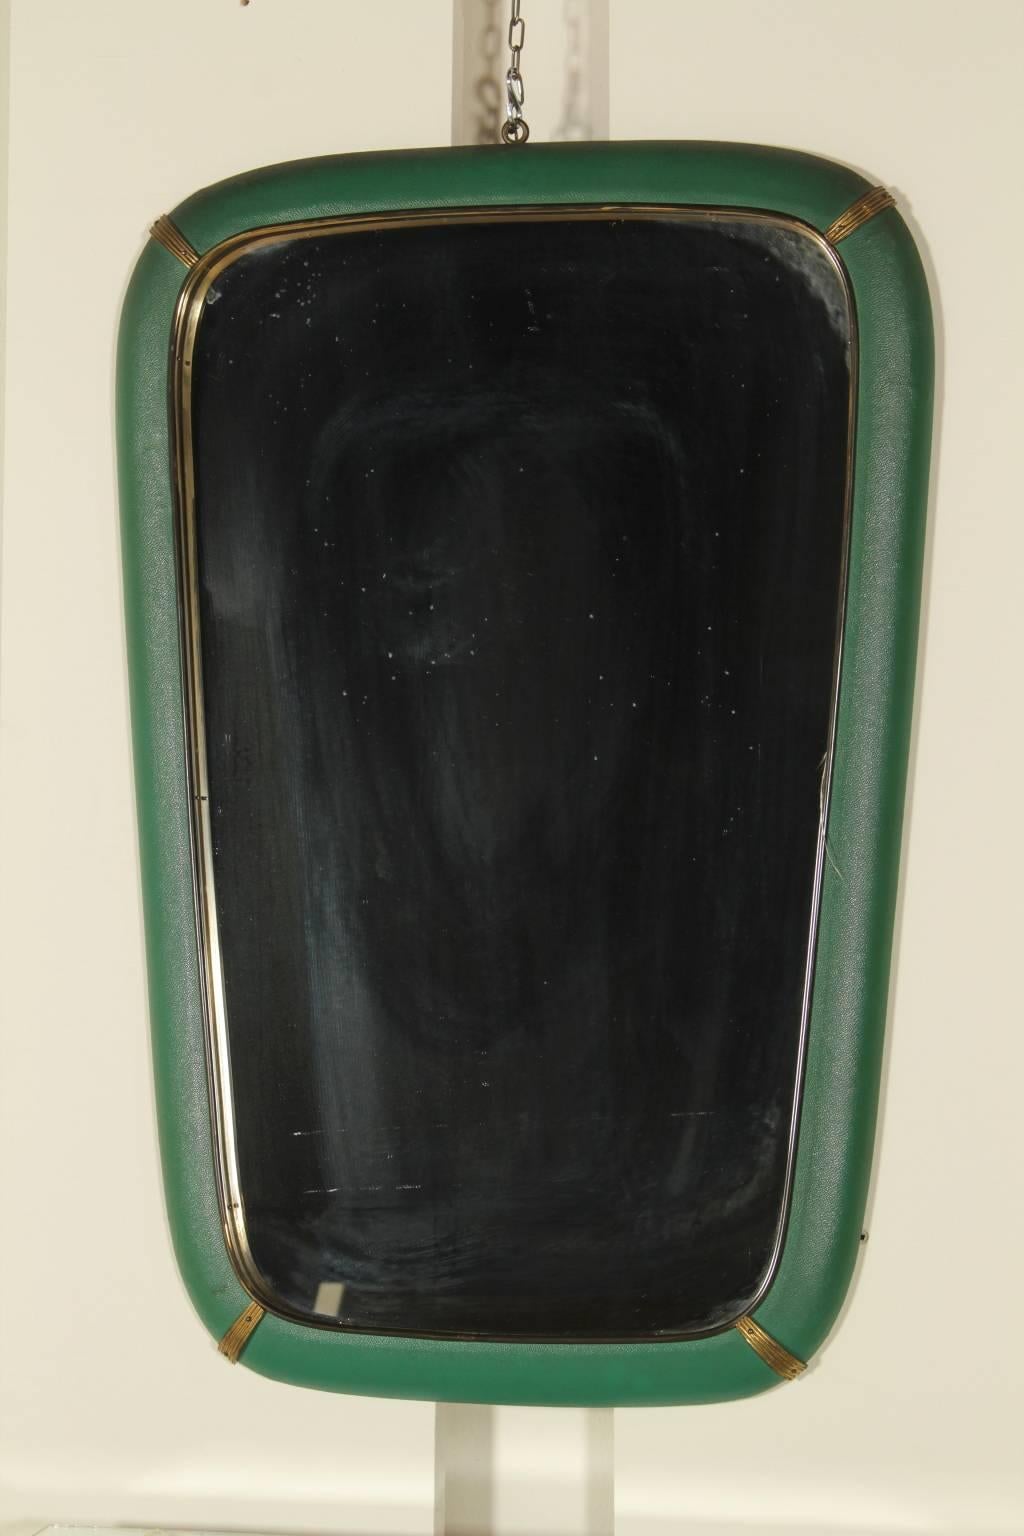 A console with mirror, wood covered with skai leatherette, brass, glass. Manufactured in Italy, 1950s.